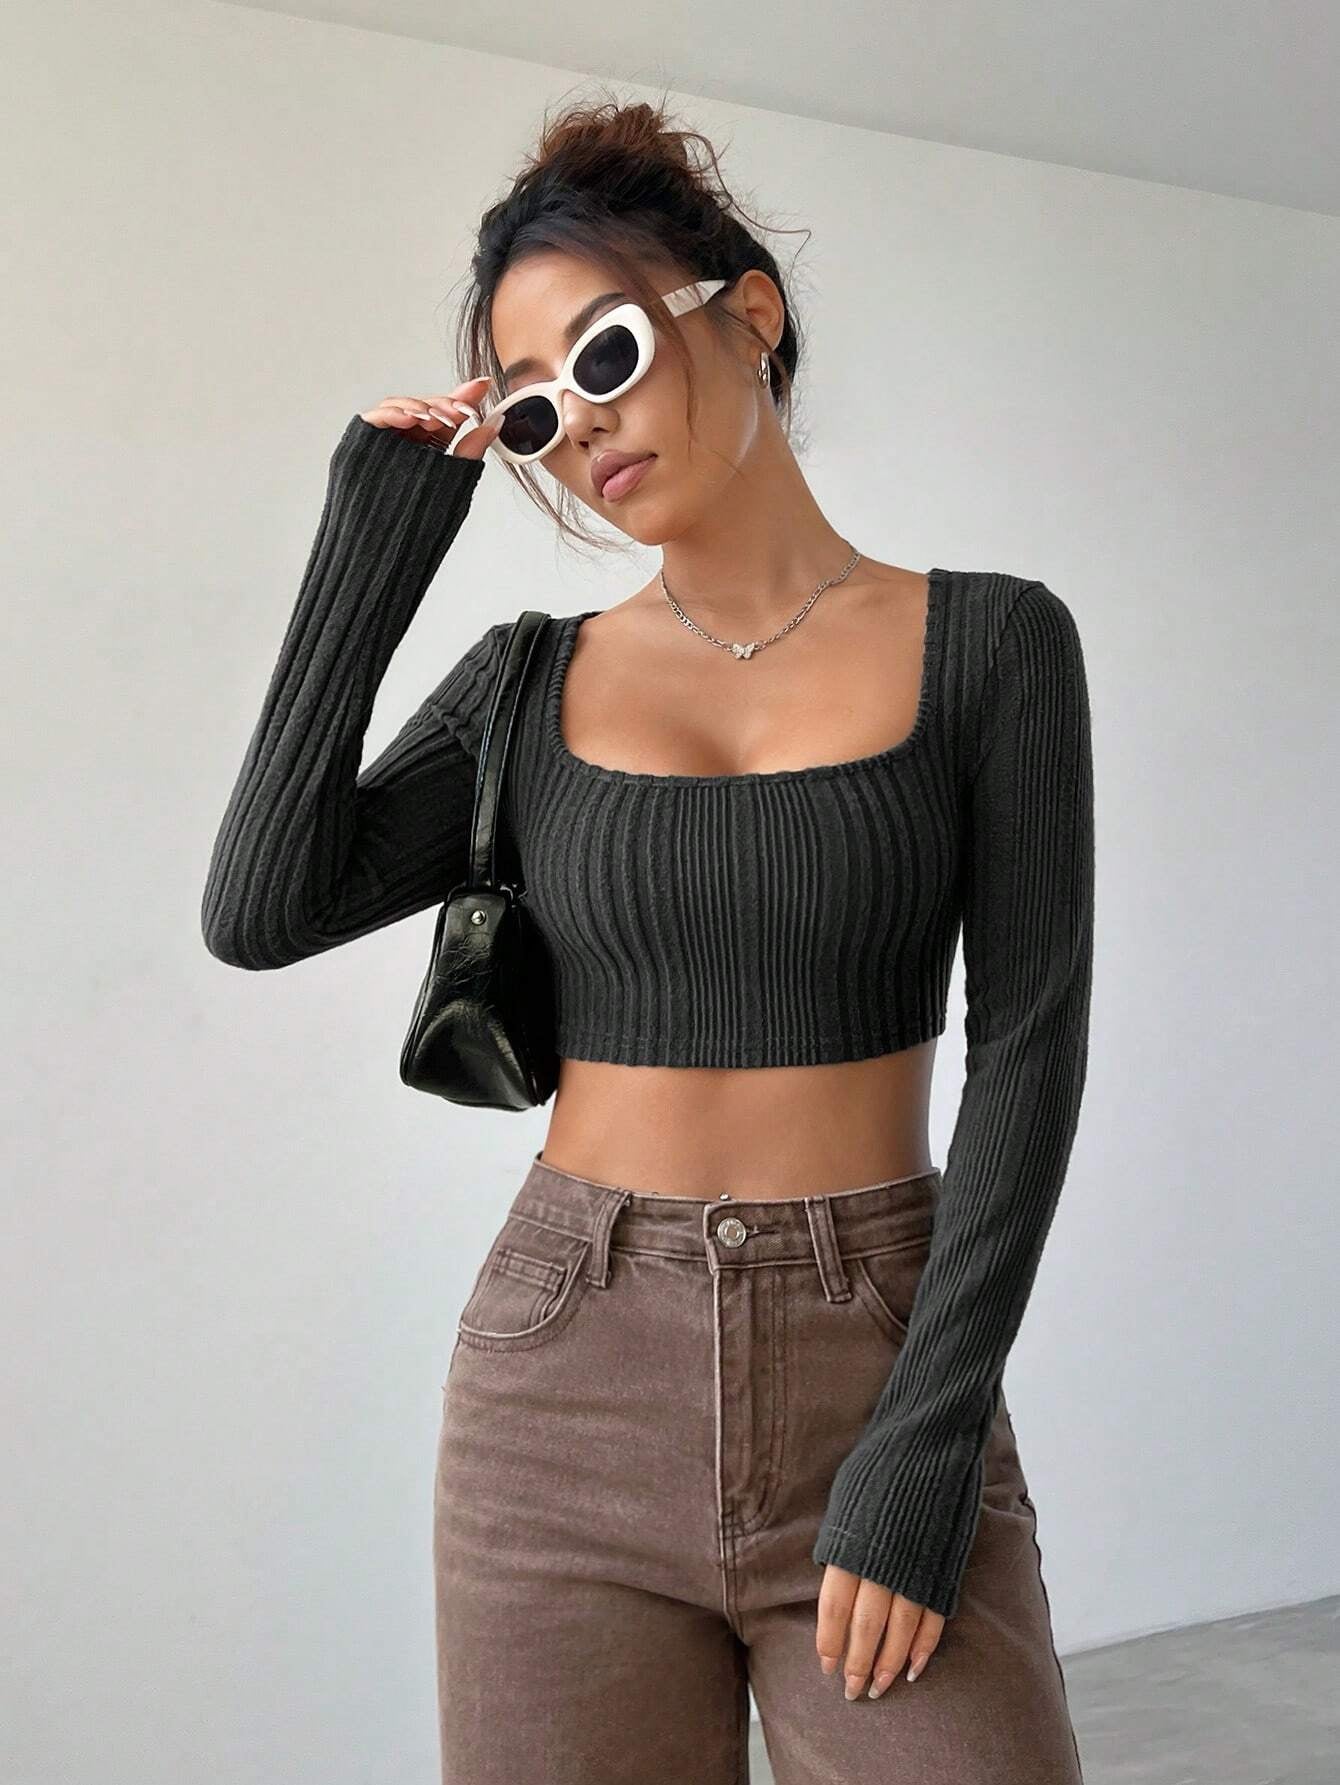 Ribbed Knit Crop Top in a Solid Color